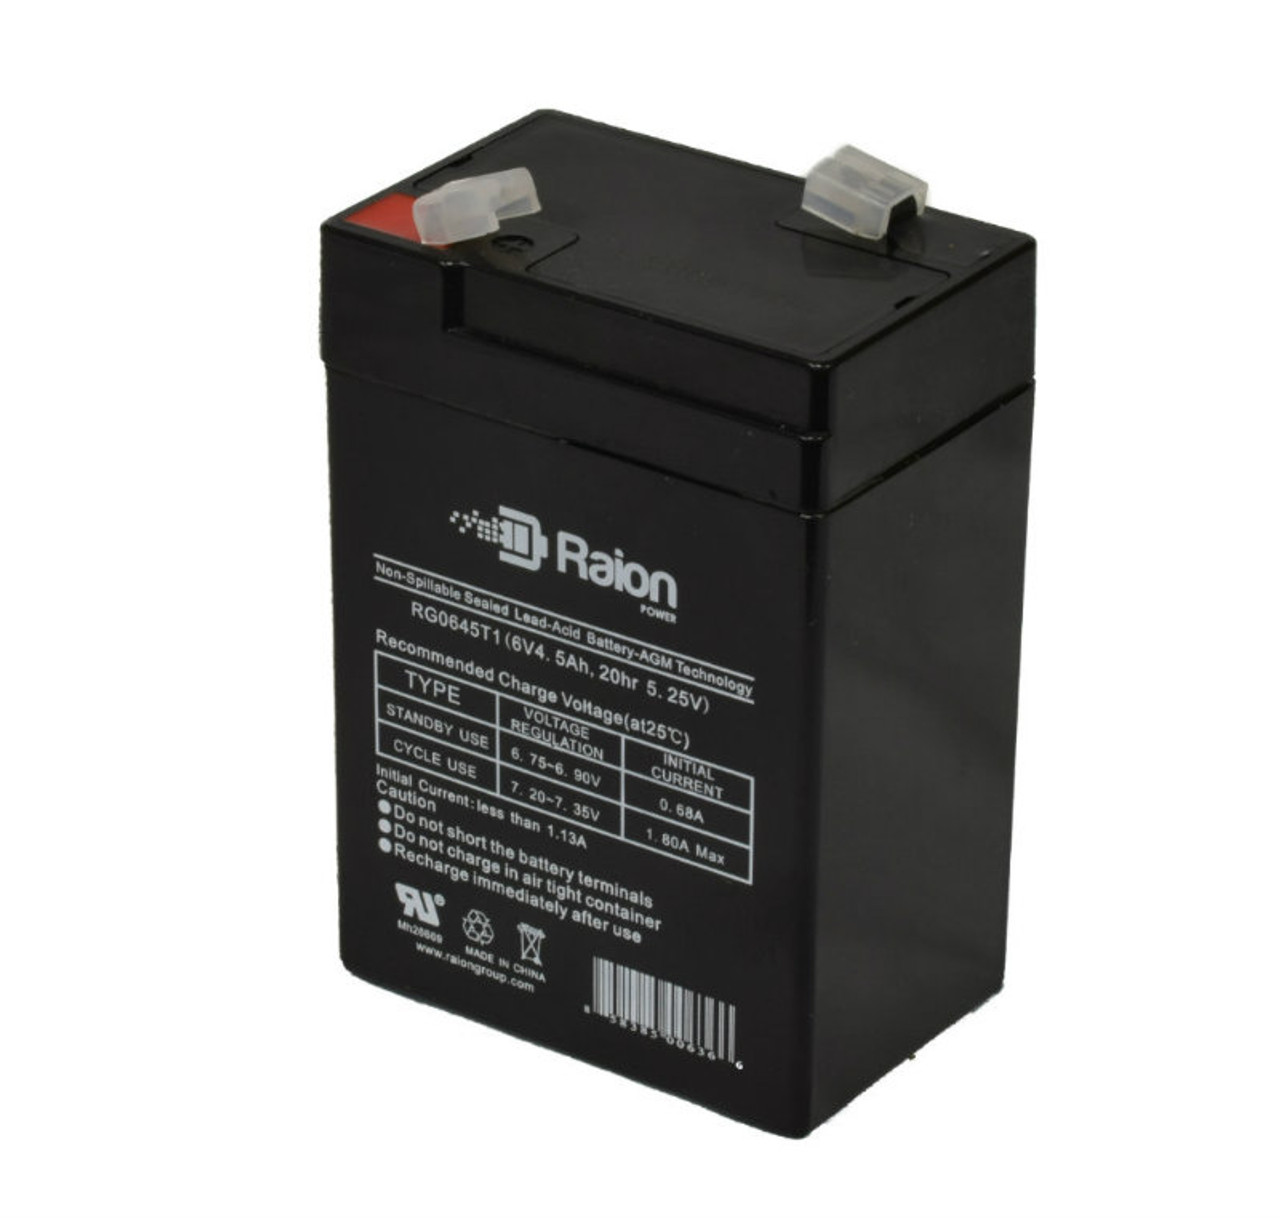 Raion Power RG0645T1 6V 4.5Ah Replacement Battery Cartridge for Powertron PT5-6